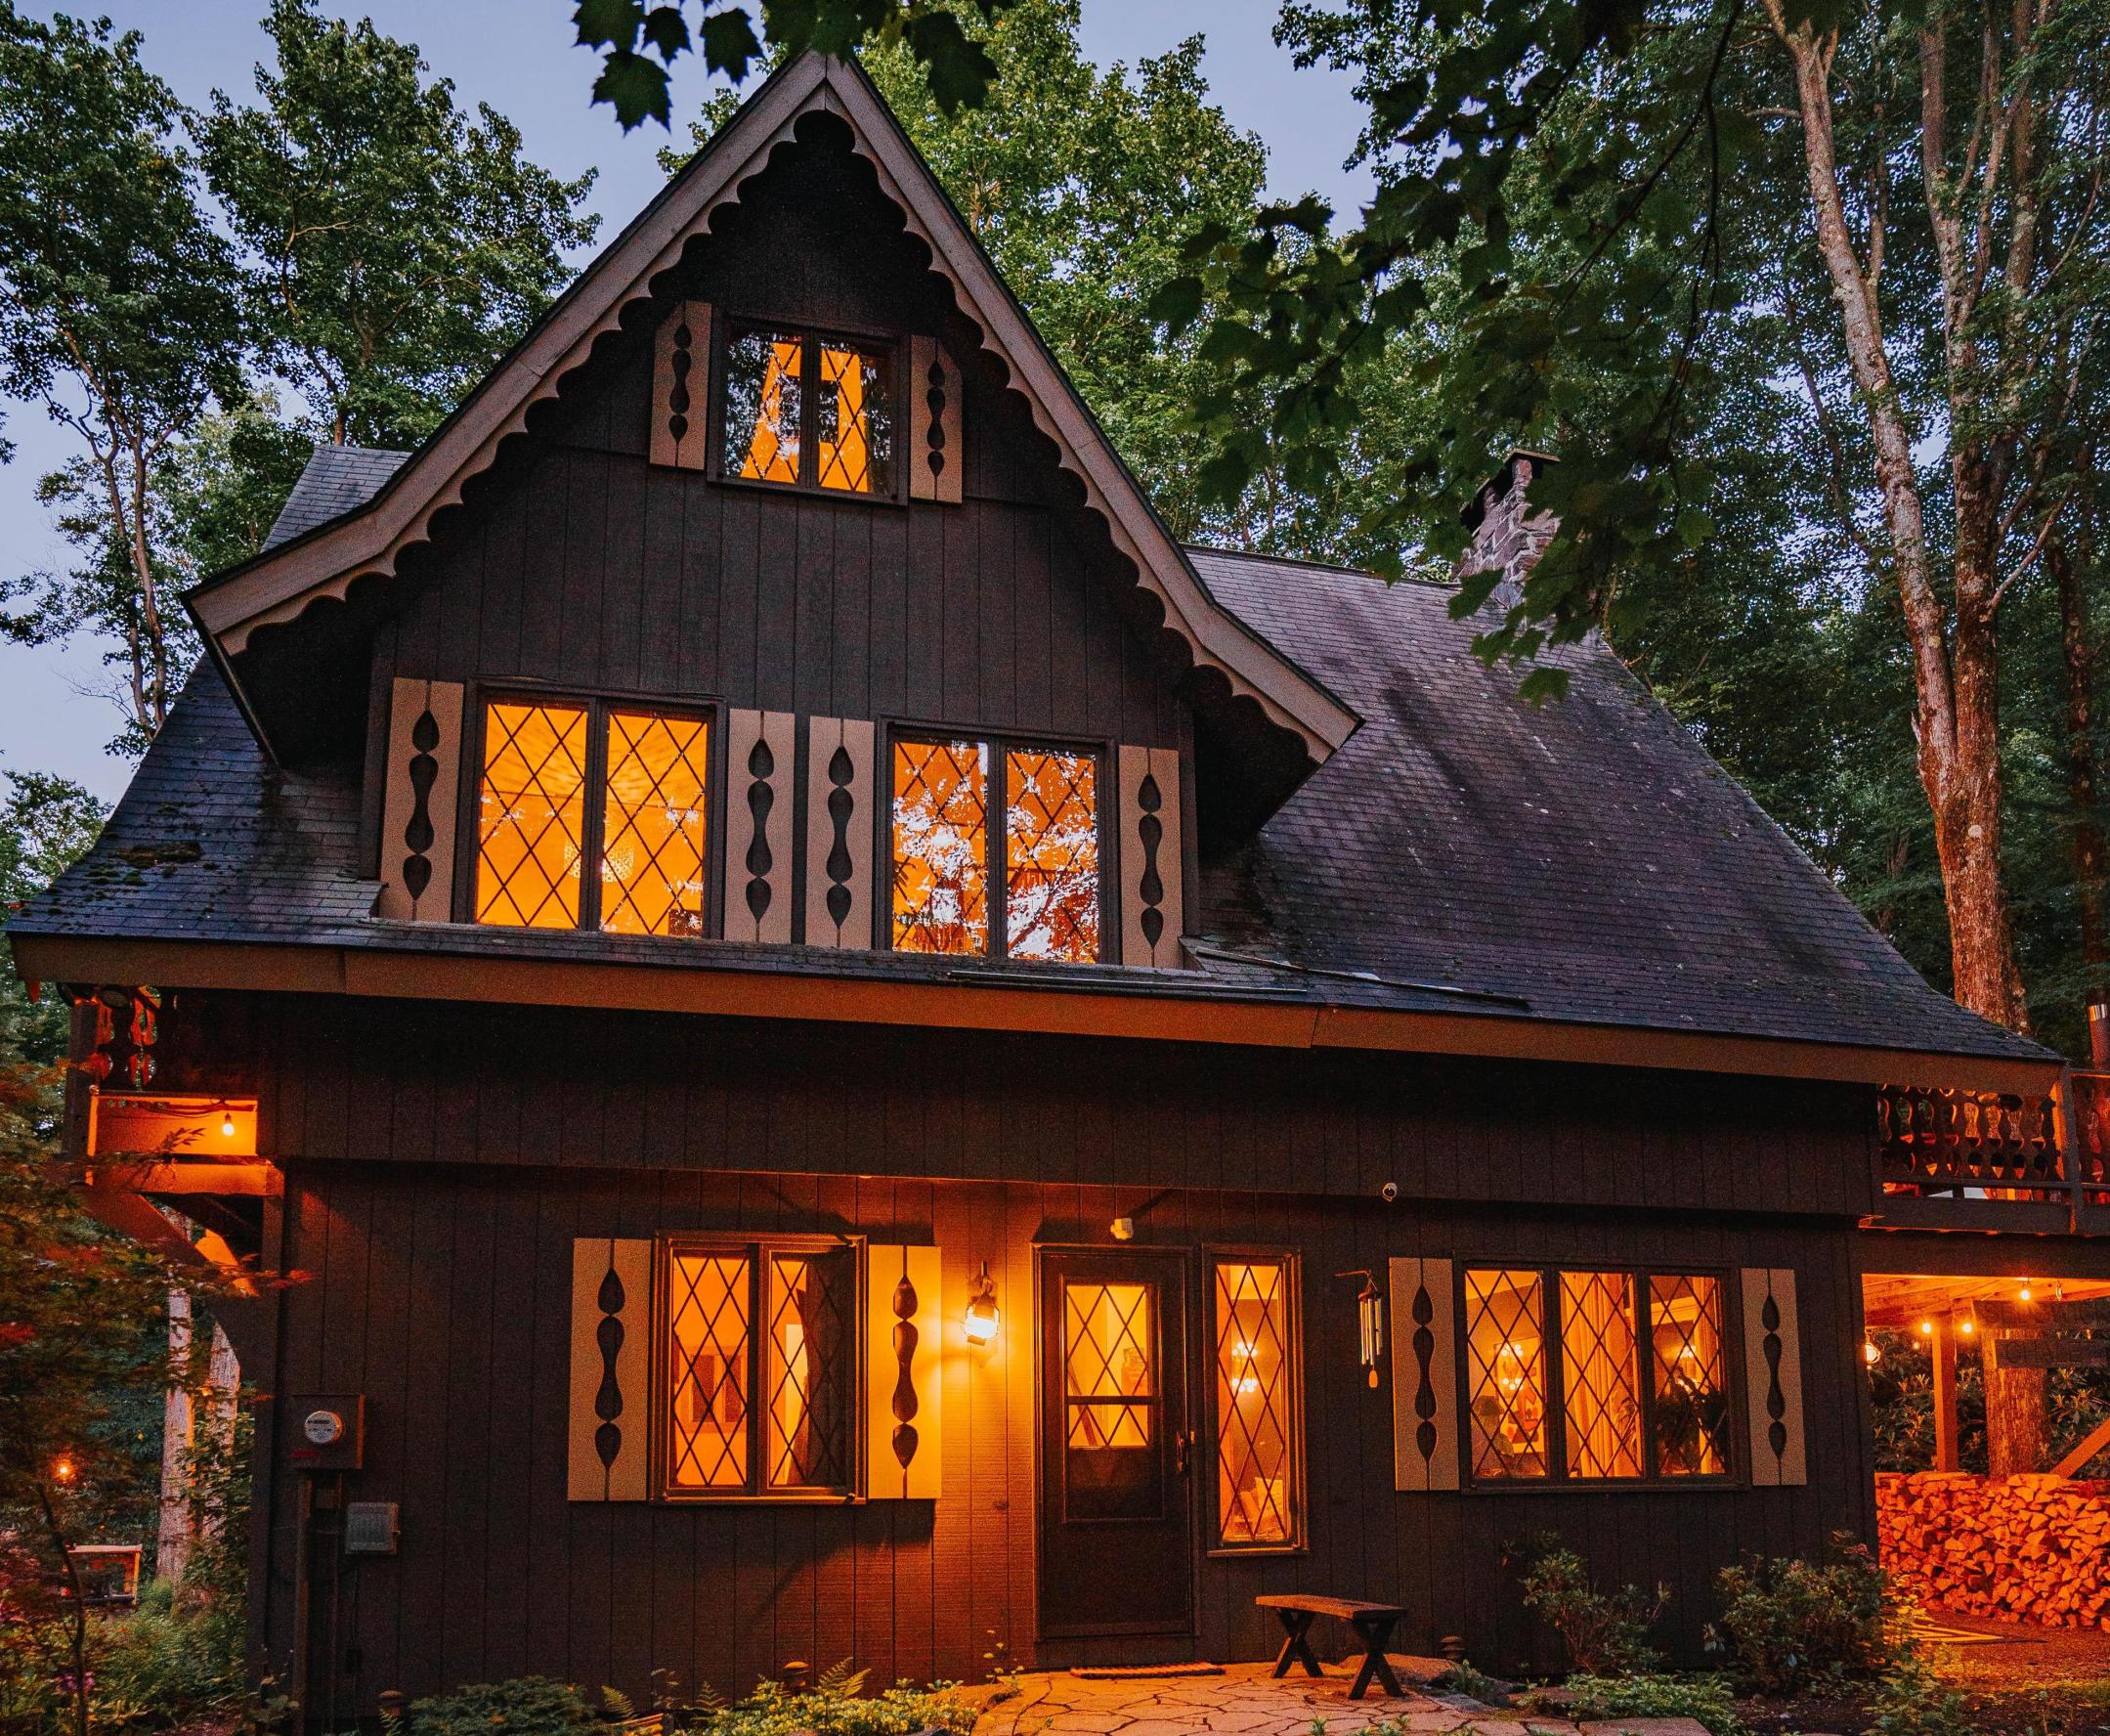 Two-story cabin with an A-frame second story, with warm yellow lighting, surrounded by trees